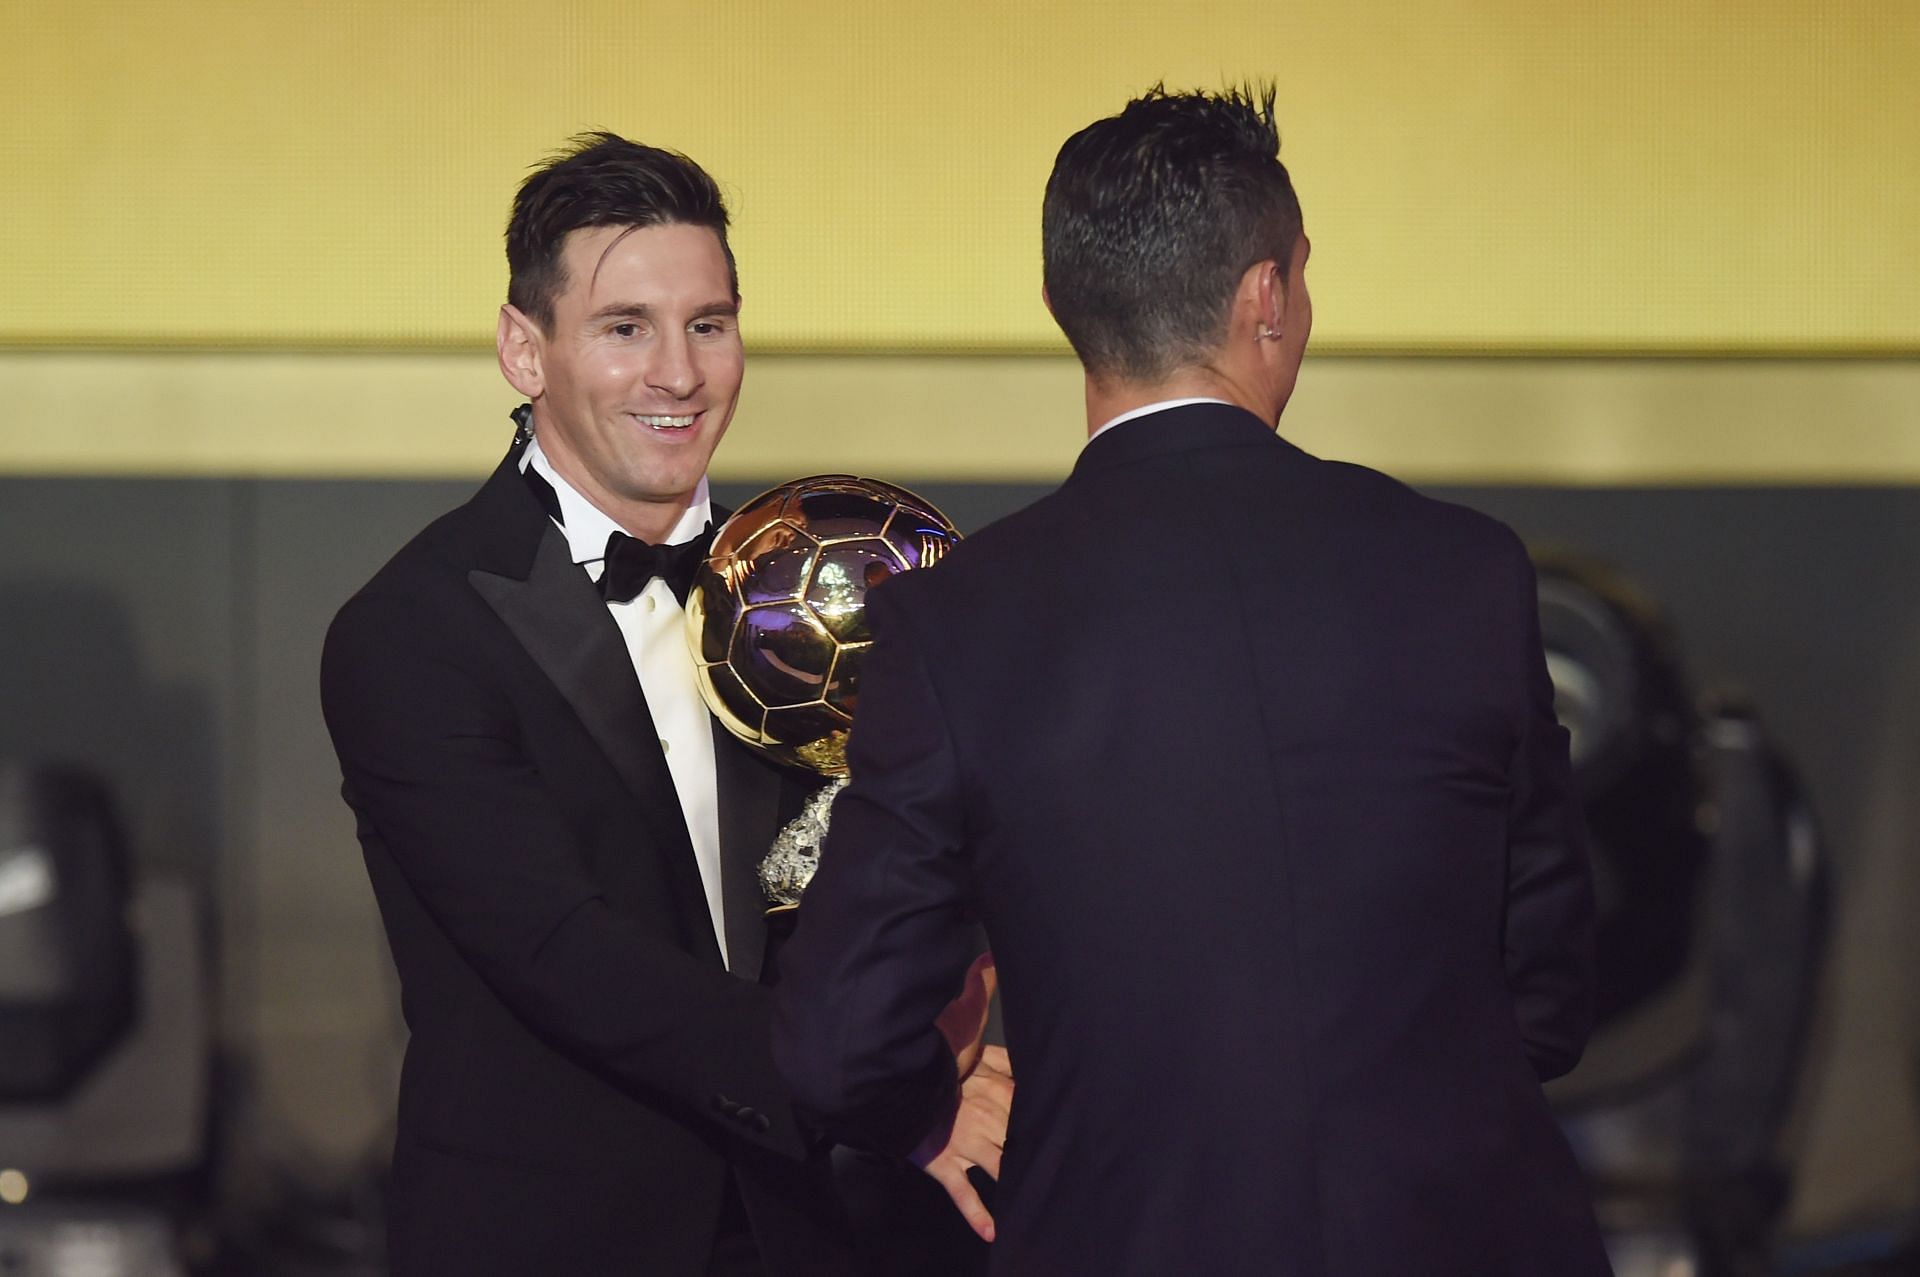 Lionel Messi admitted in 2017 that he was hurt after Cristiano Ronaldo tied him for 5 Ballon d&#039;Or awards.